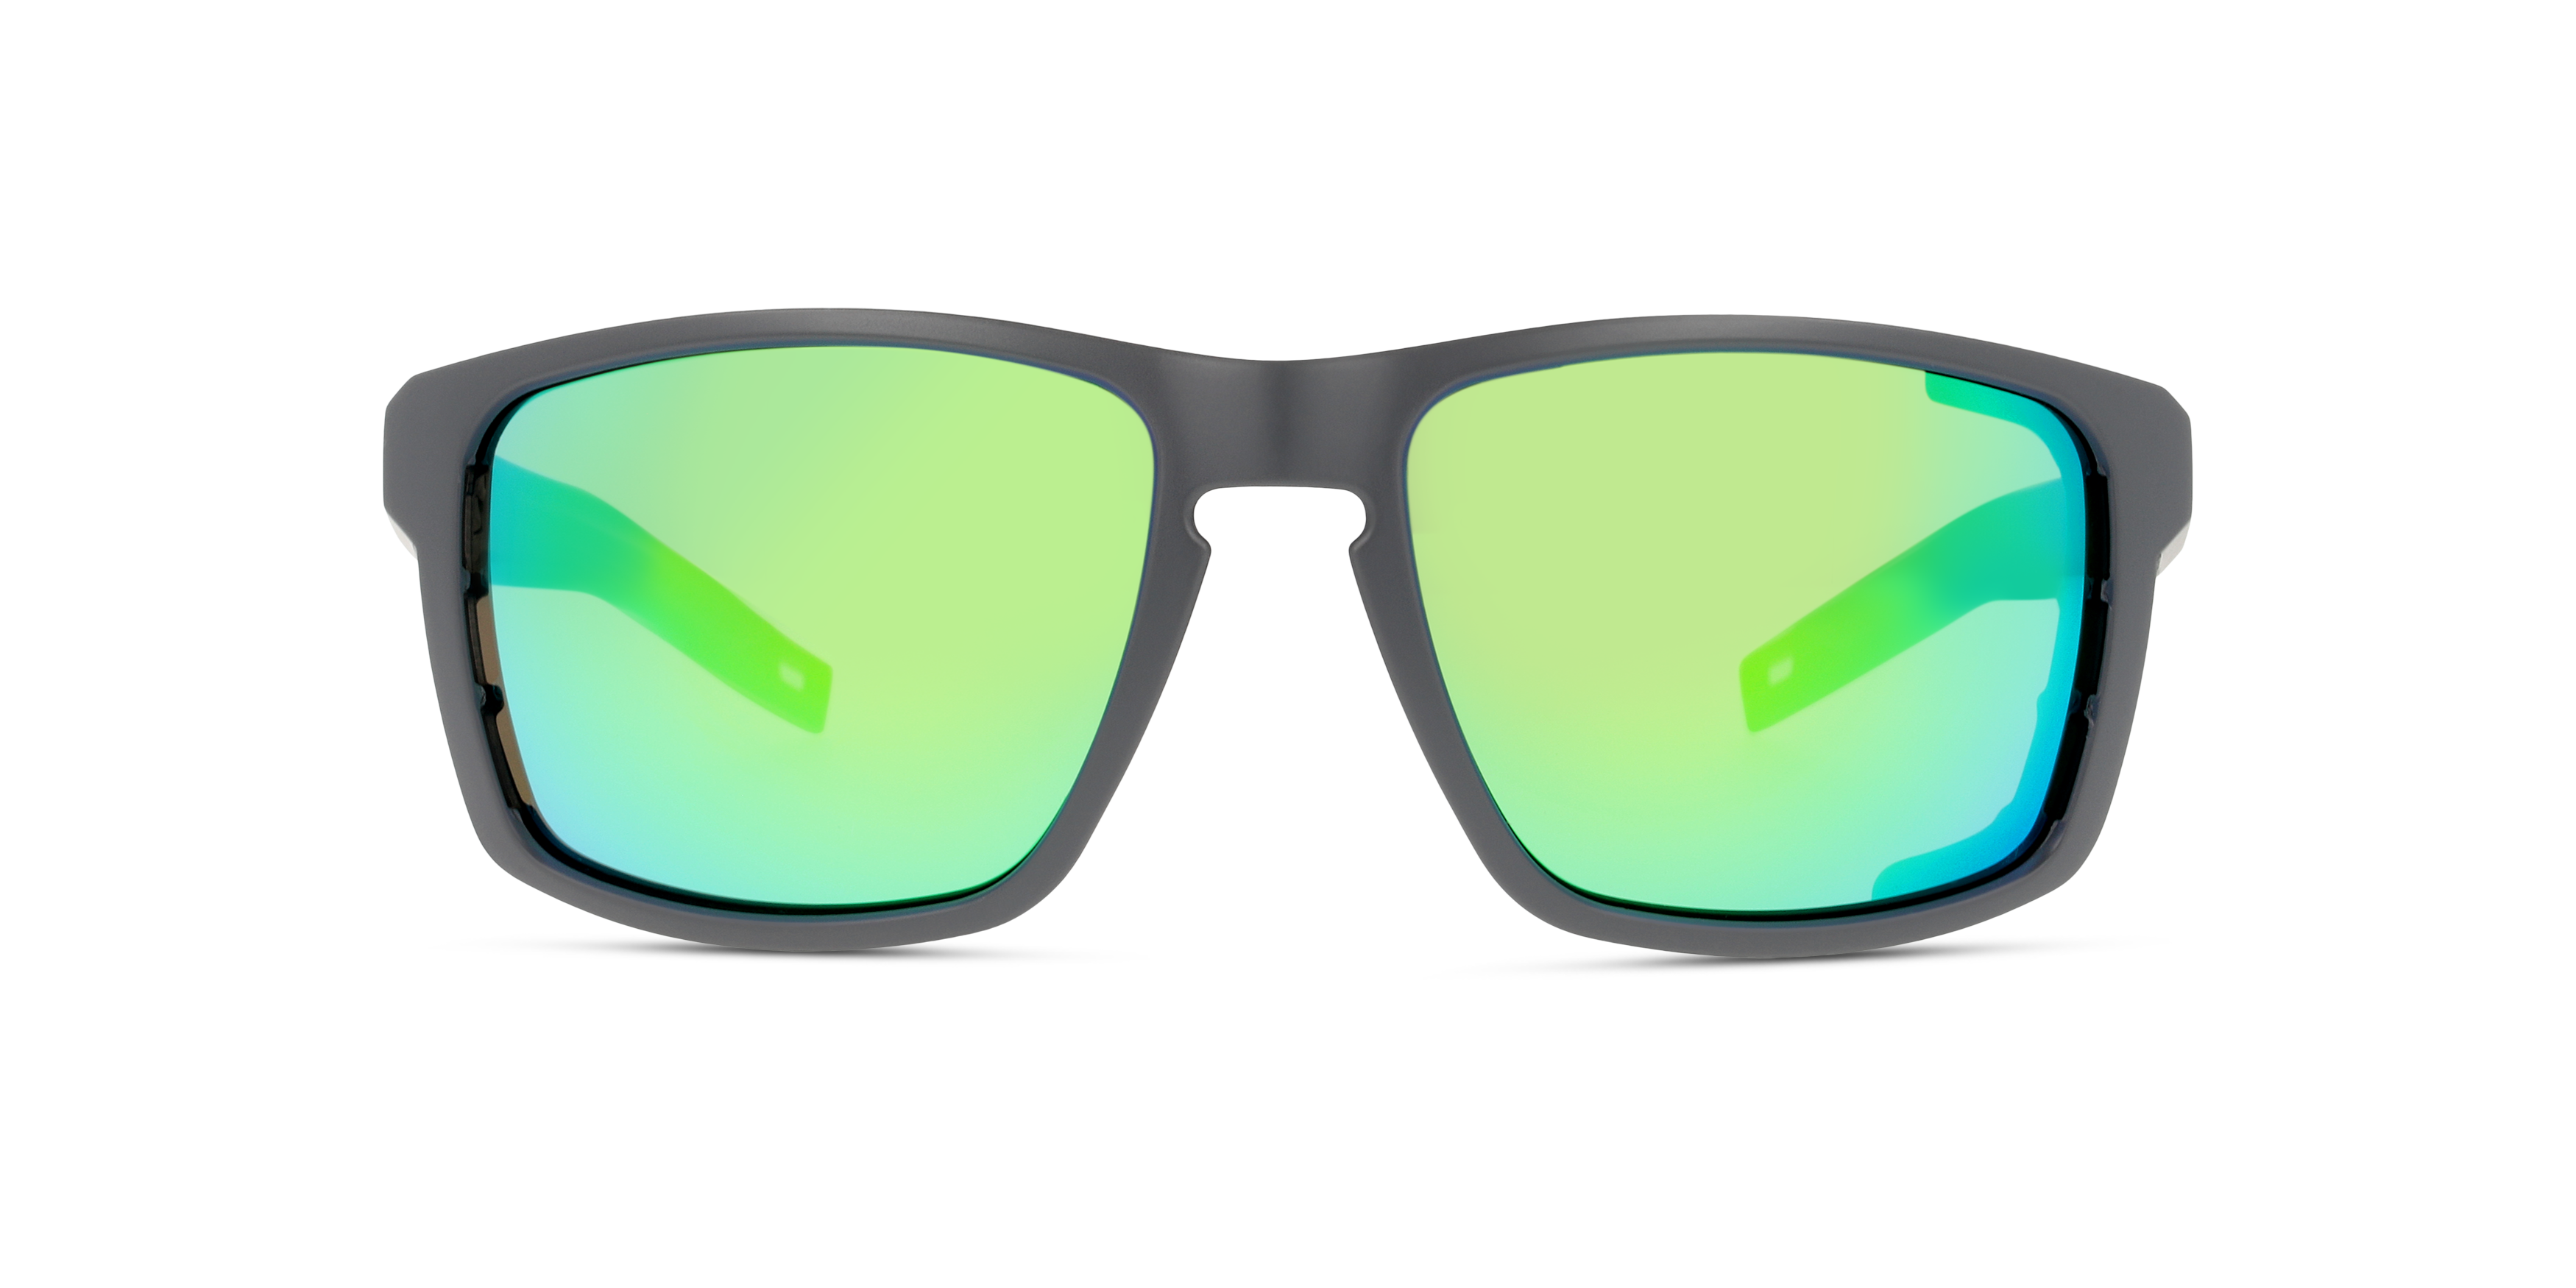 [products.image.front] JULBO Shield J506 20